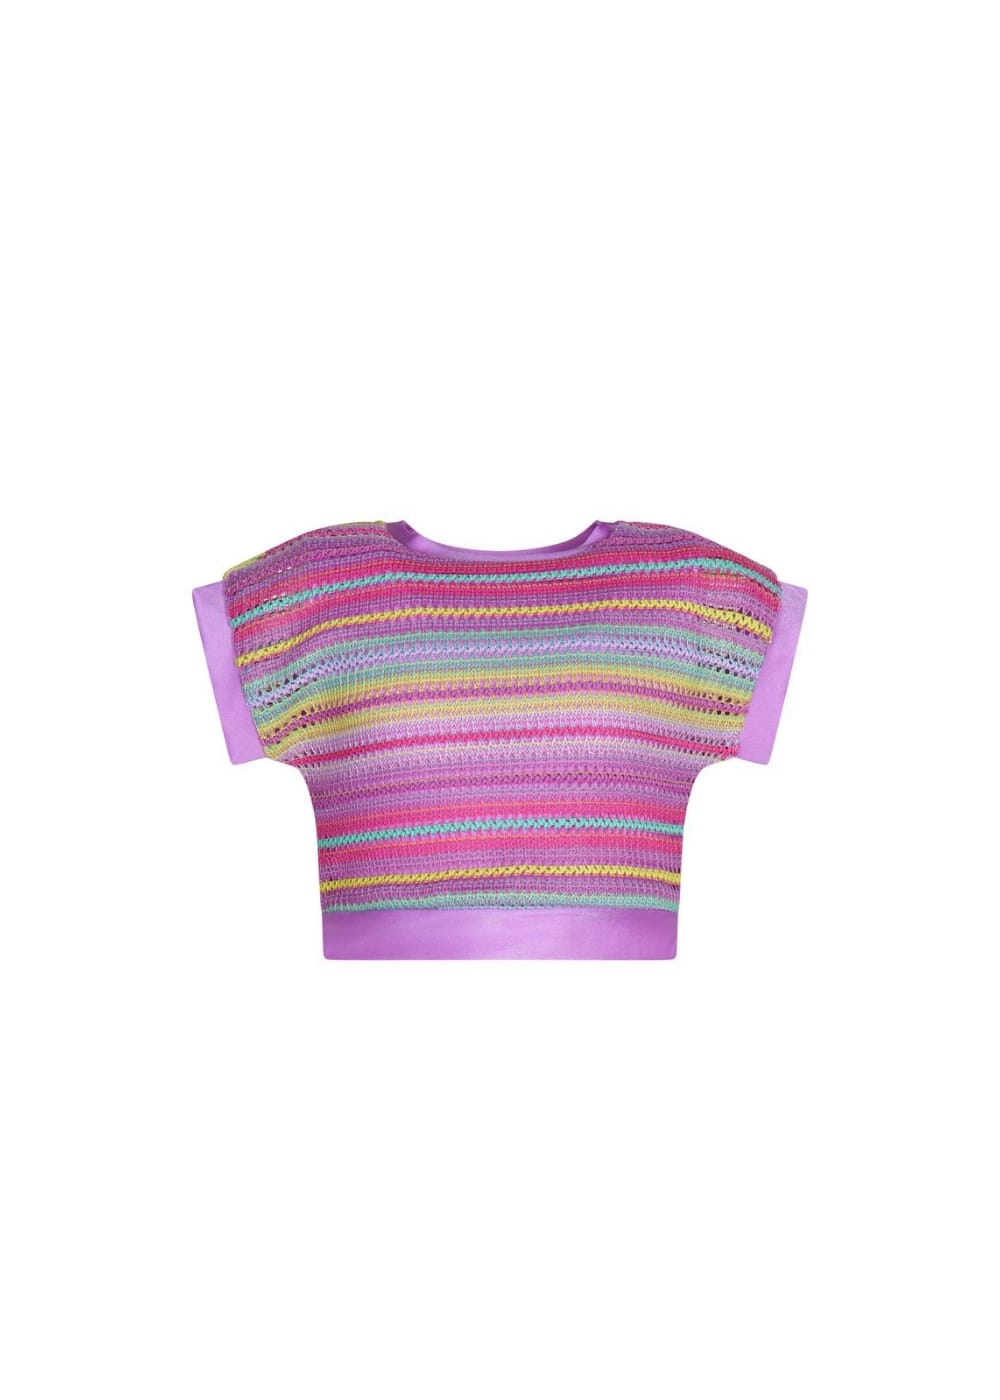 Featured image for “Fun & Fun T-shirt Cropped Multicolore”